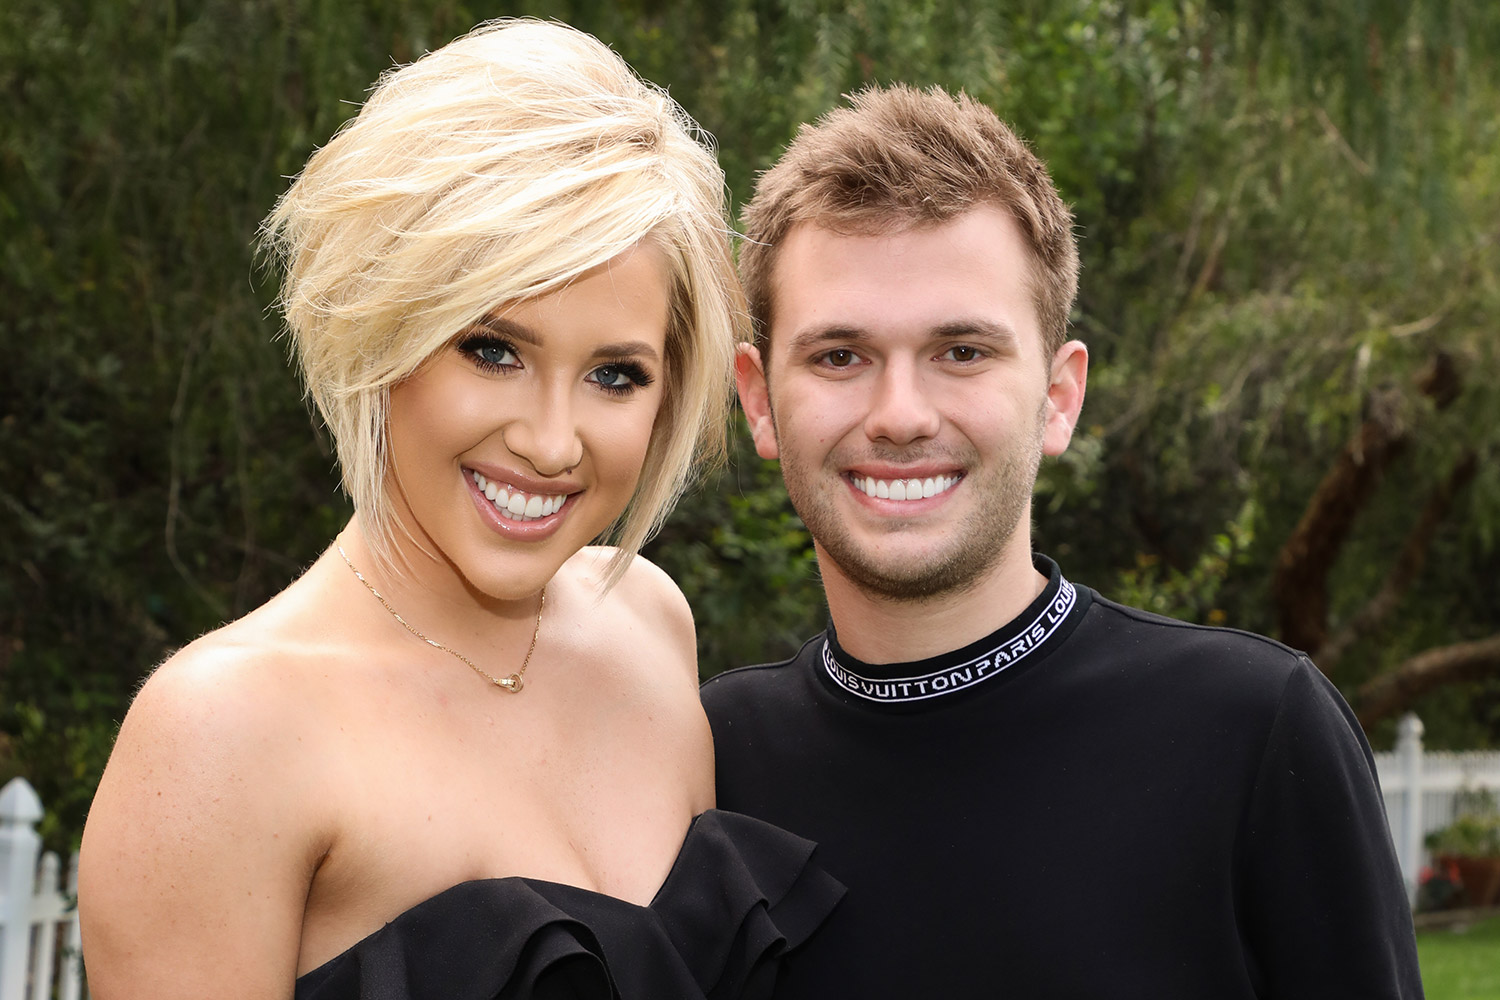 Chrisley Knows Best star Chase Chrisley Wants To Move To The Bahamas! Todd Chrisley To Allow It